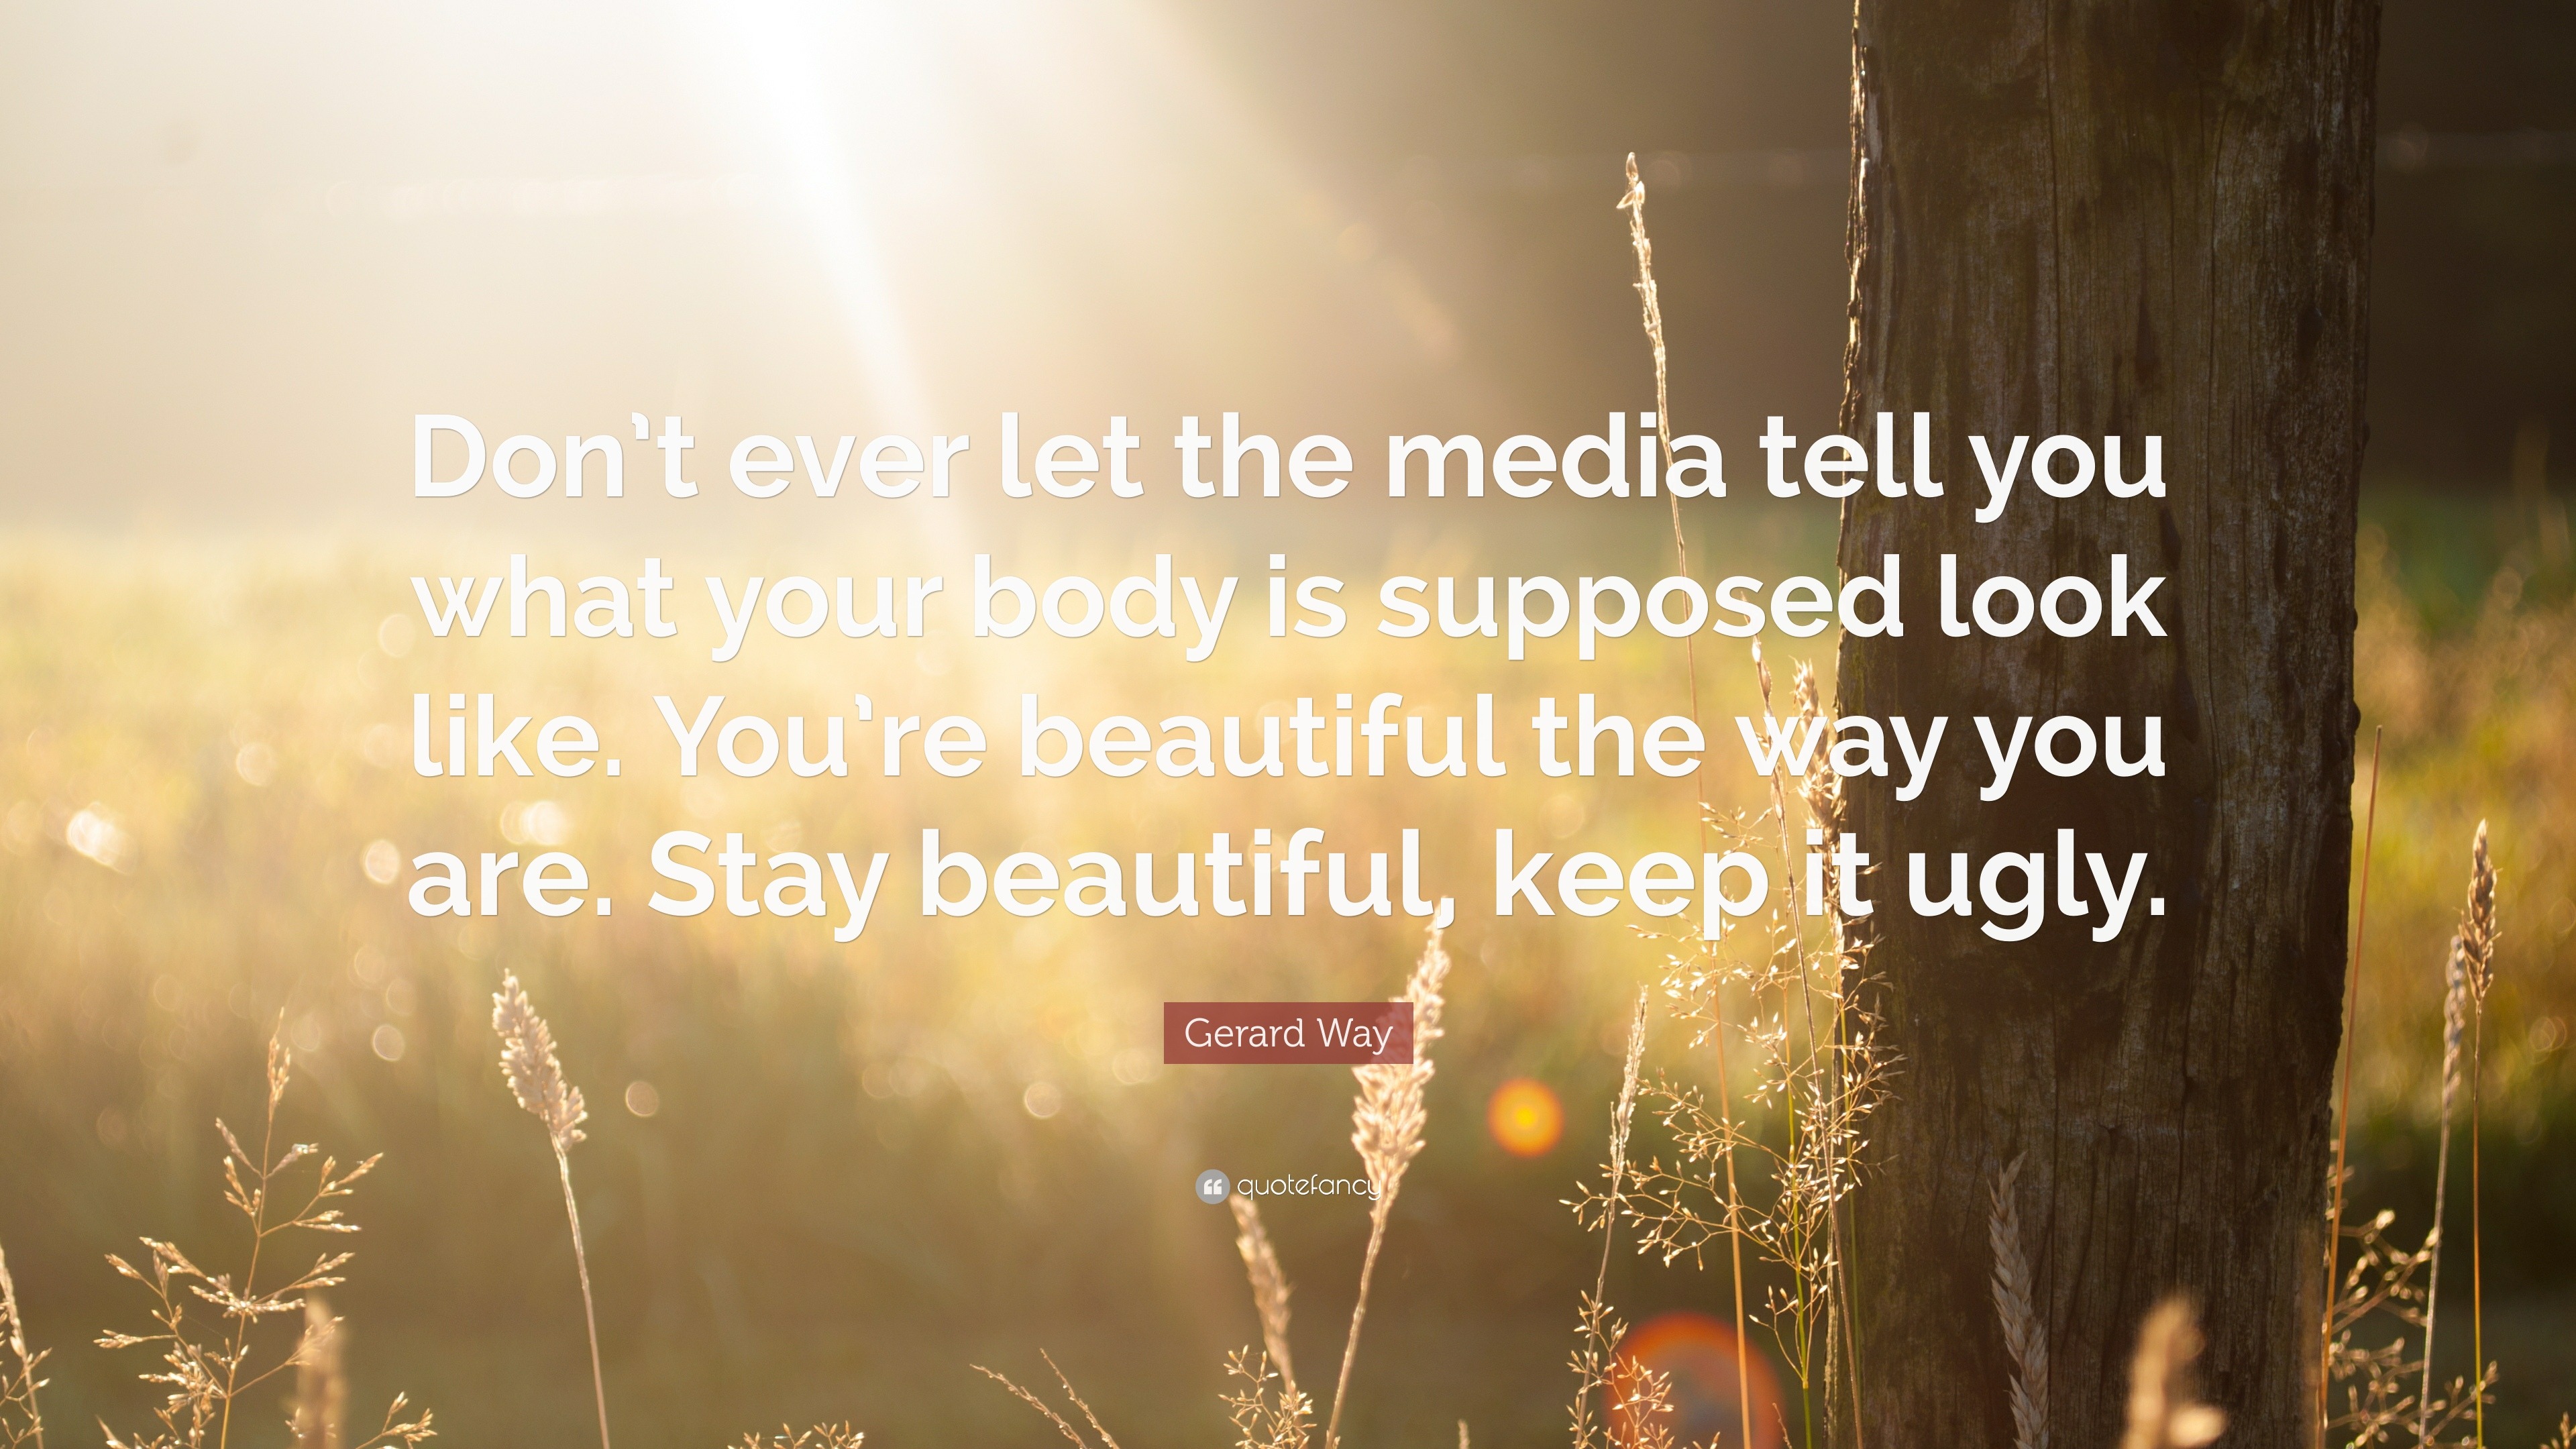 Gerard Way Quote: “Don’t ever let the media tell you what your body is